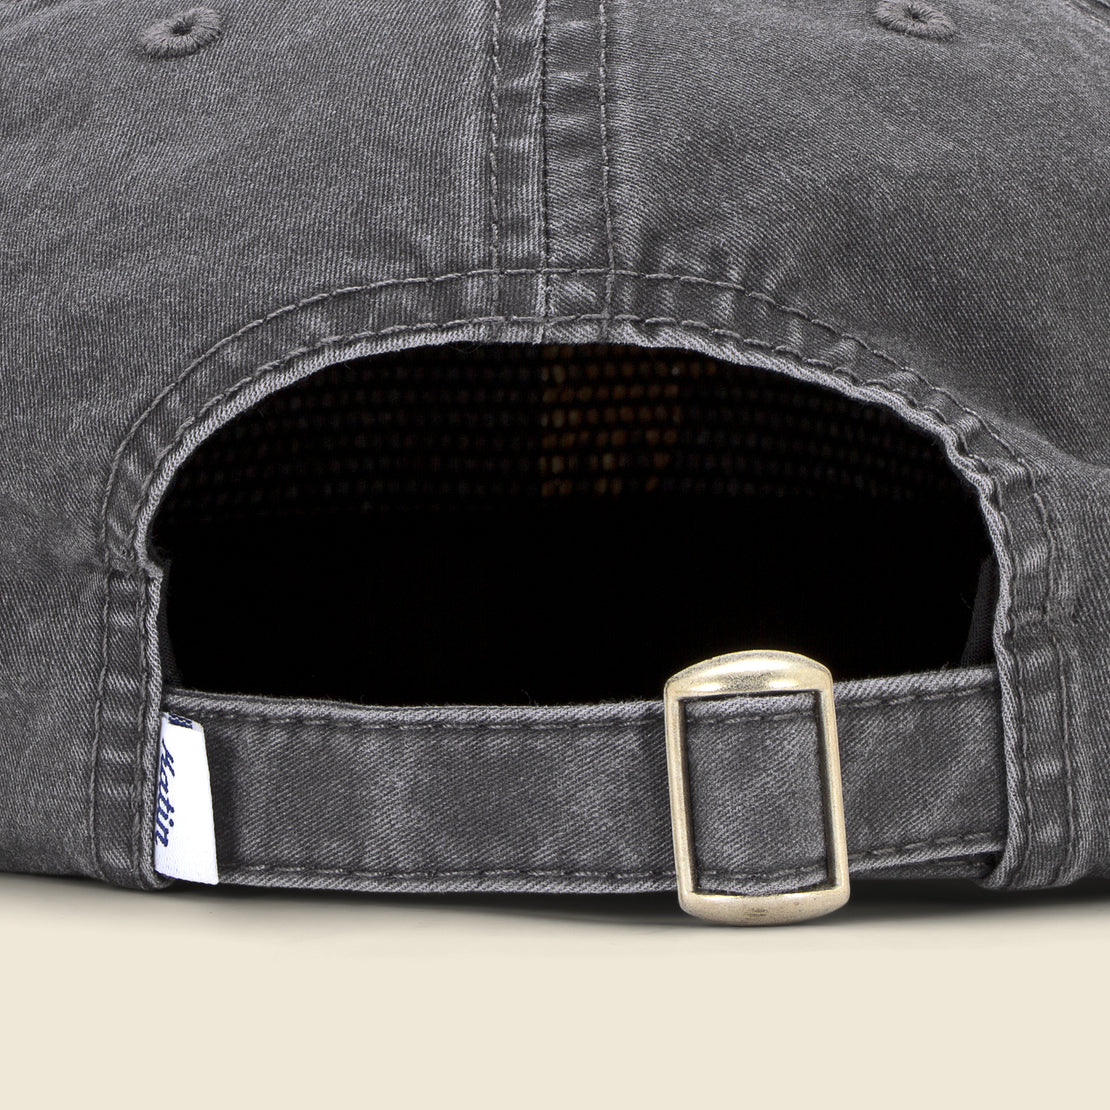 Dos Palmas Cotton Twill Hat - Black Wash - Katin - STAG Provisions - Accessories - Hats